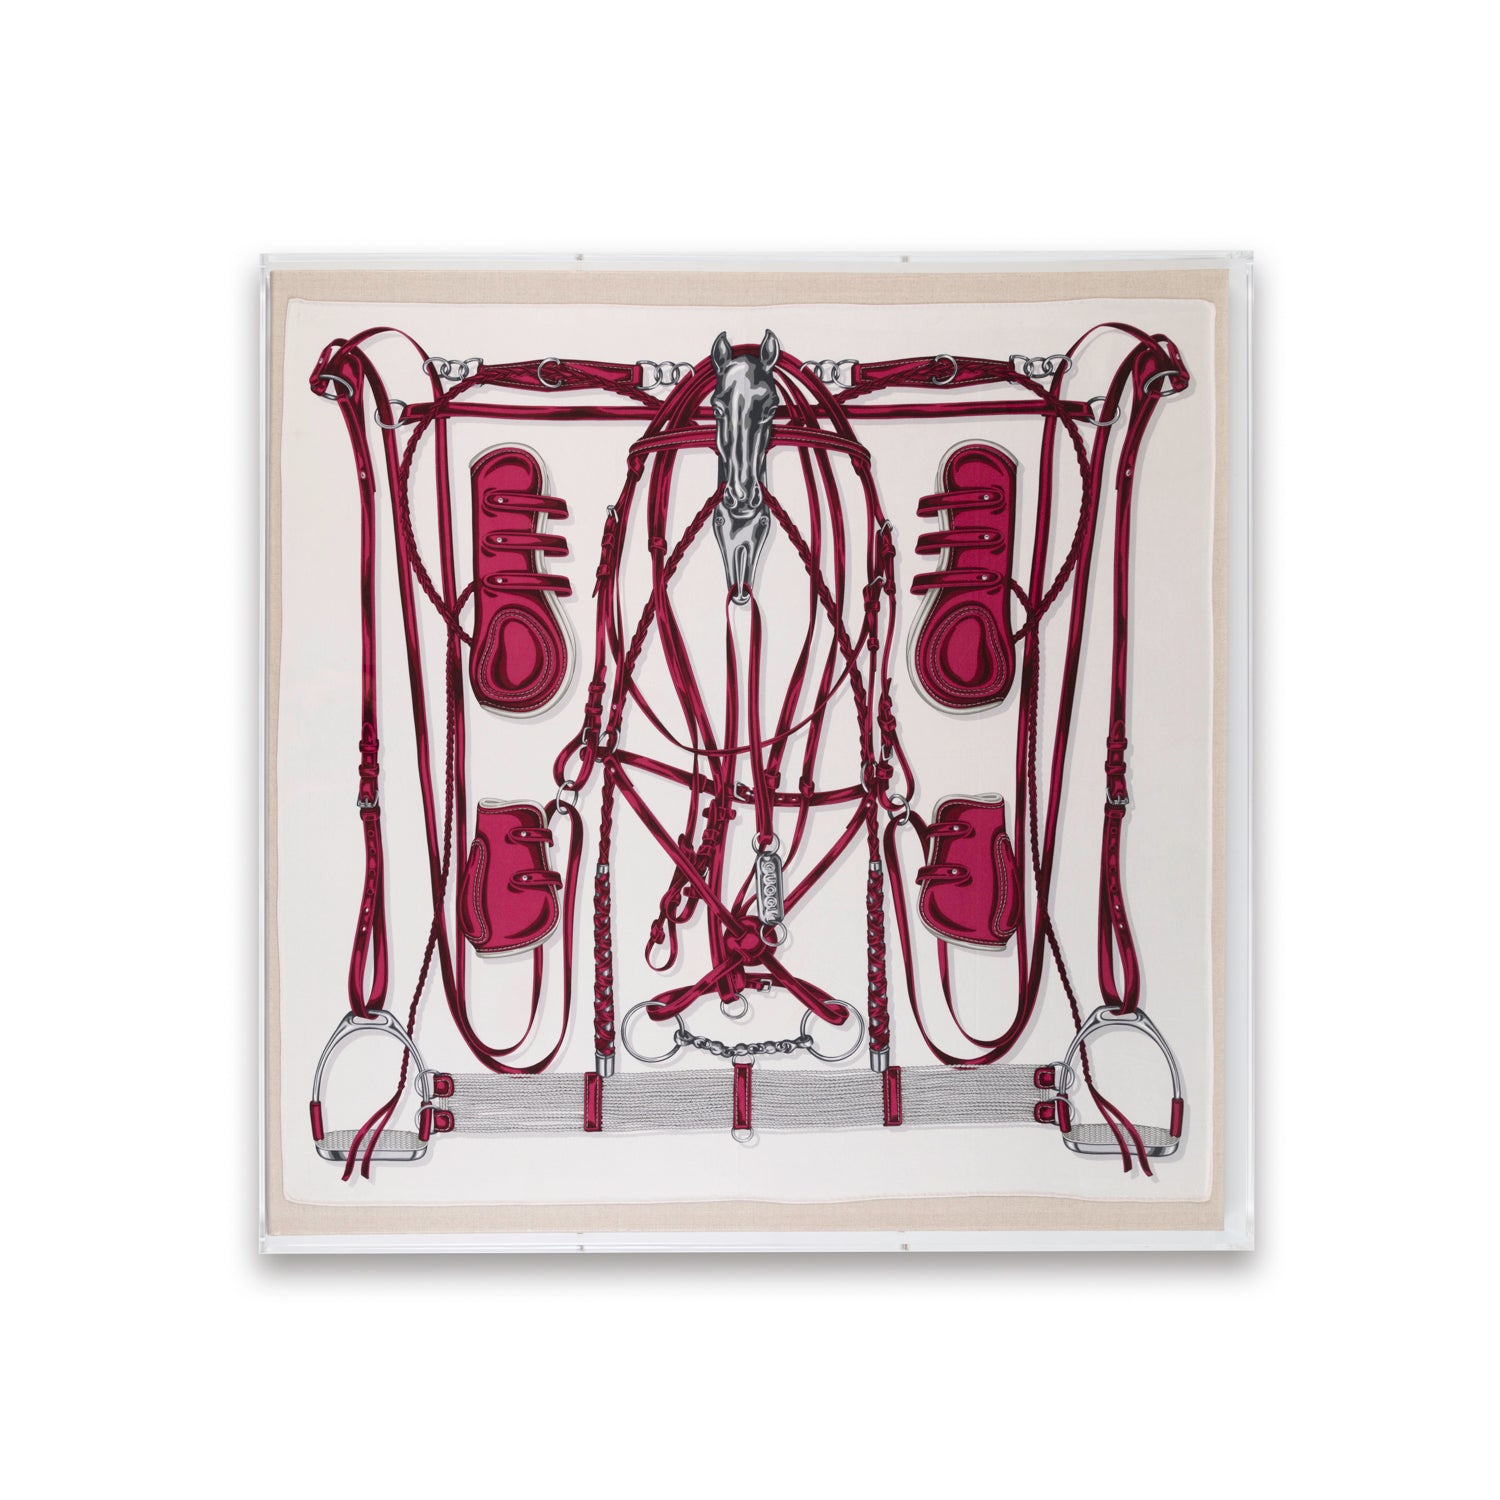 Framelines Gallery - Hermes Silk Scarf A delicate piece of Art,  enhancing your wall decor with customised framework. #hermes #silk #scarf  #luxury #gift #wallart #walldecor #frame #framing #framework #custom  #customart #customised #beloud